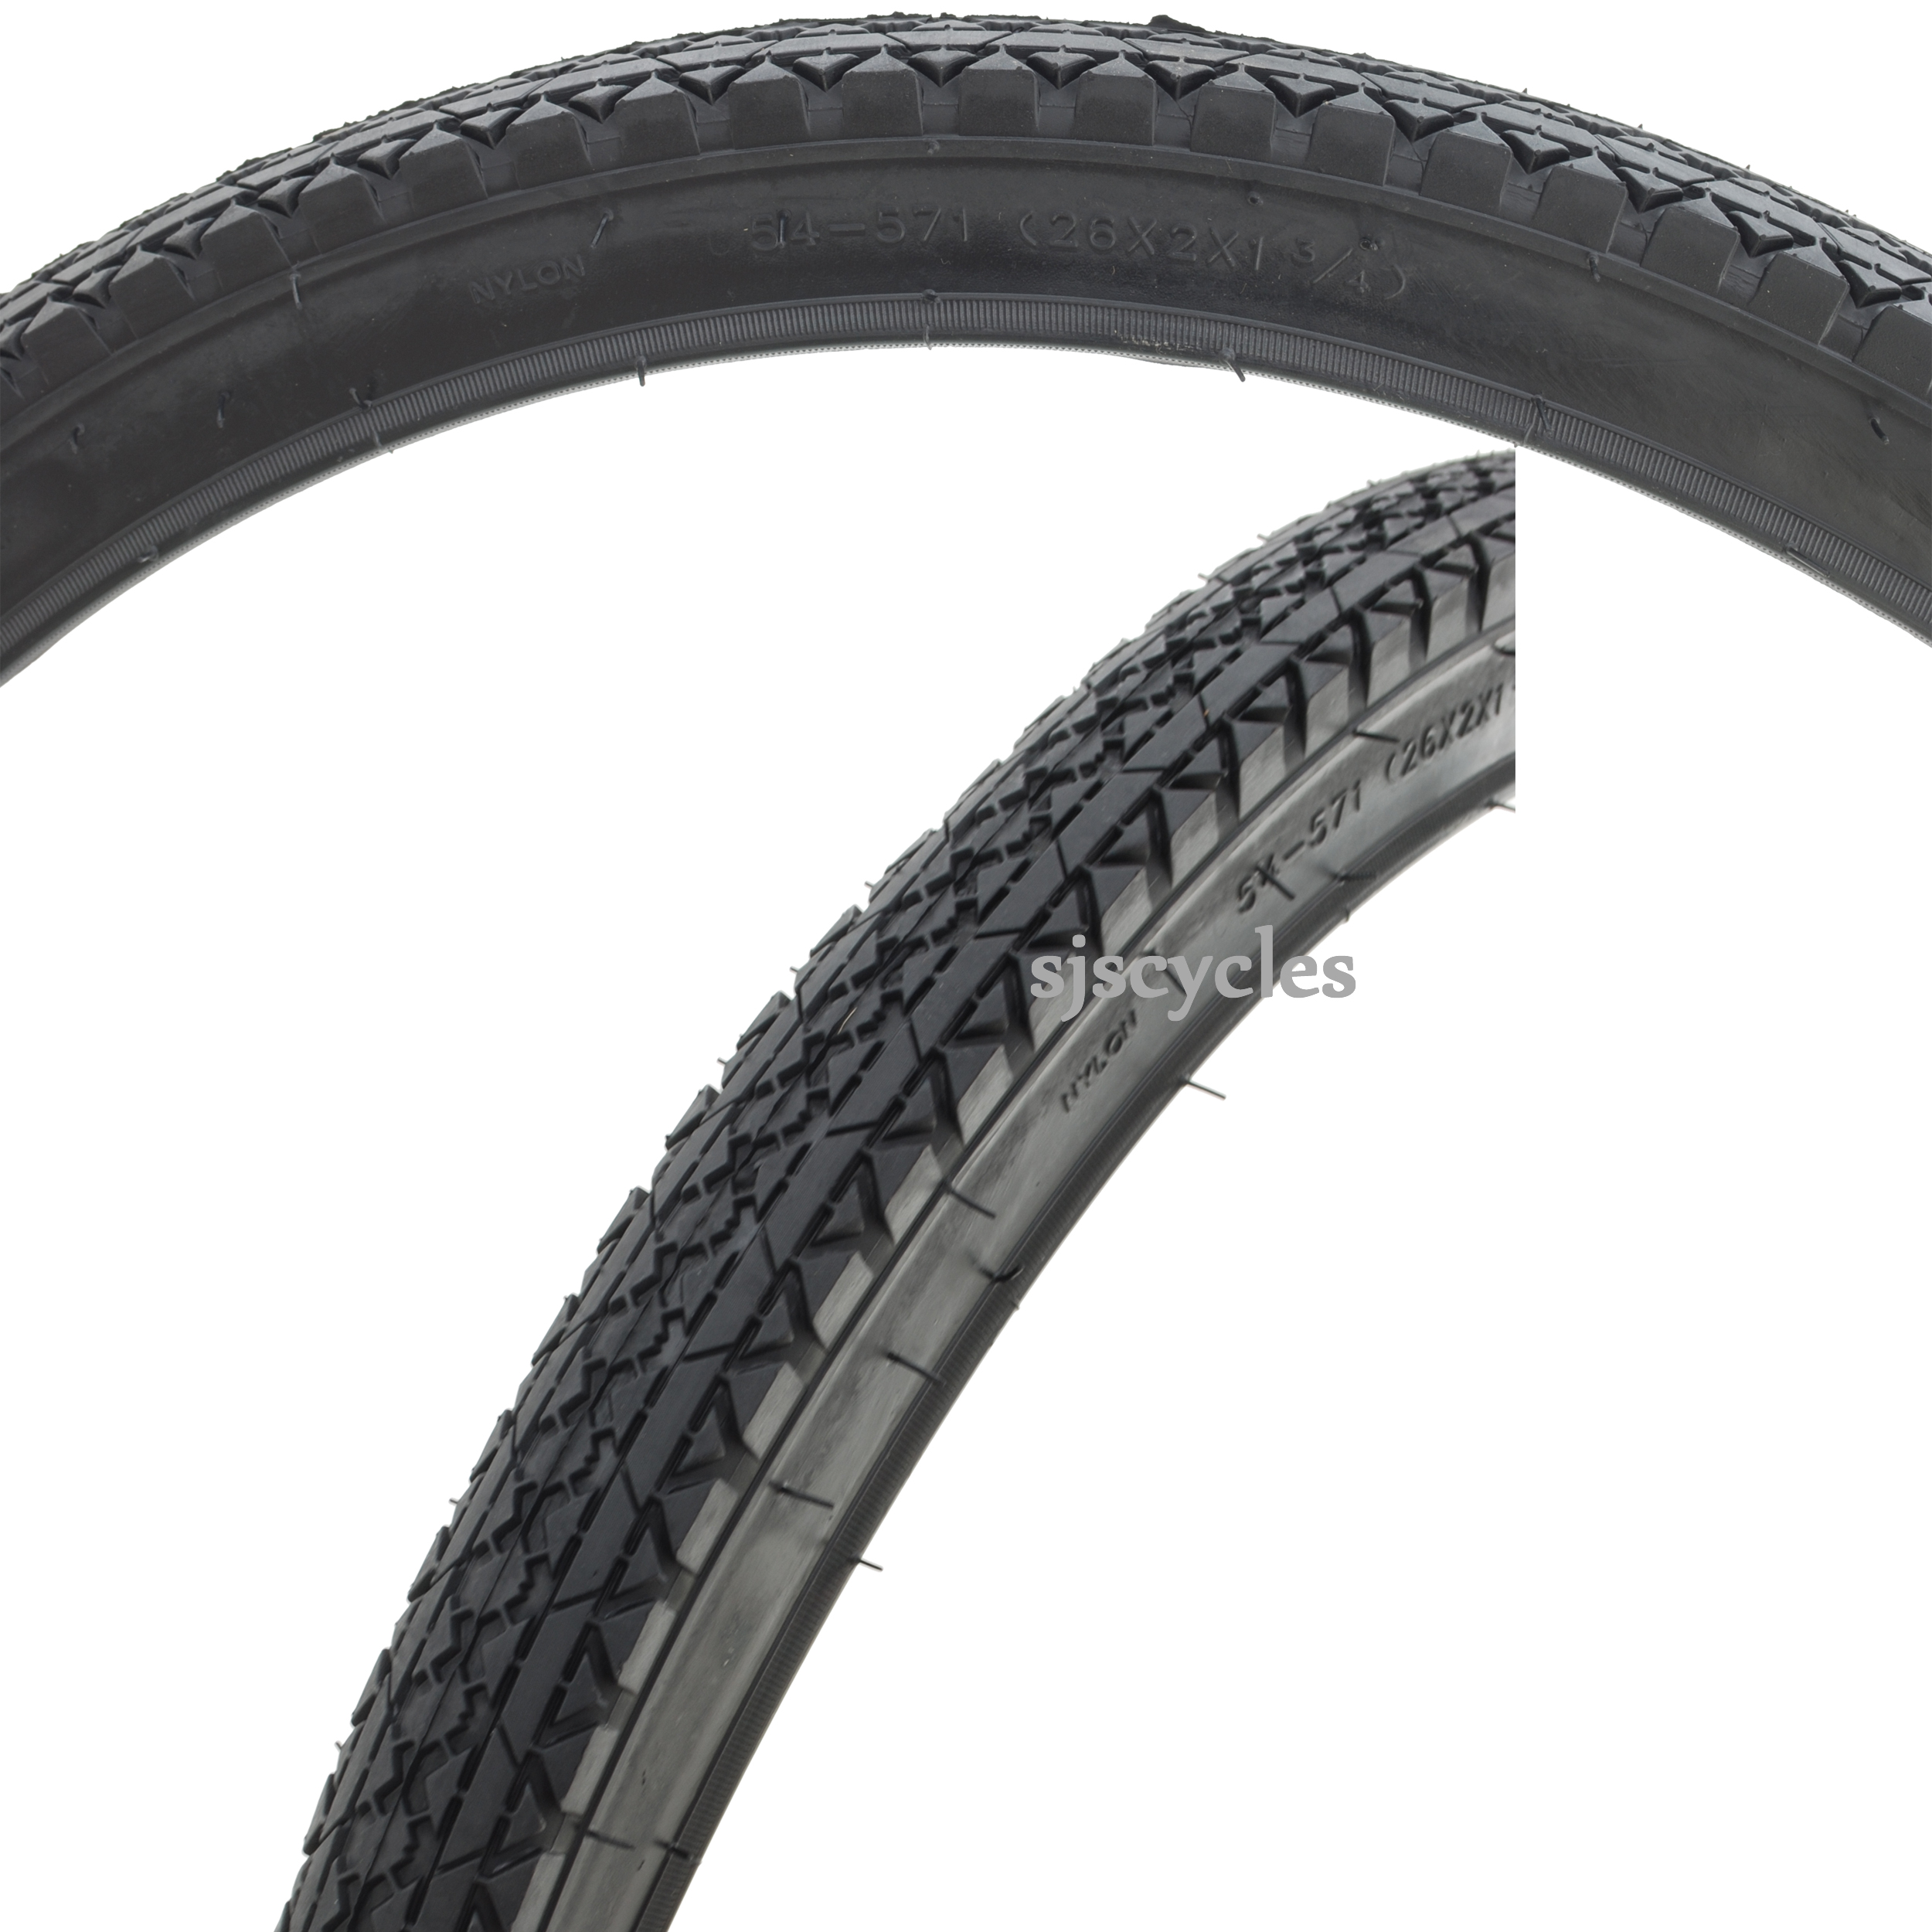 26 inch road tyres